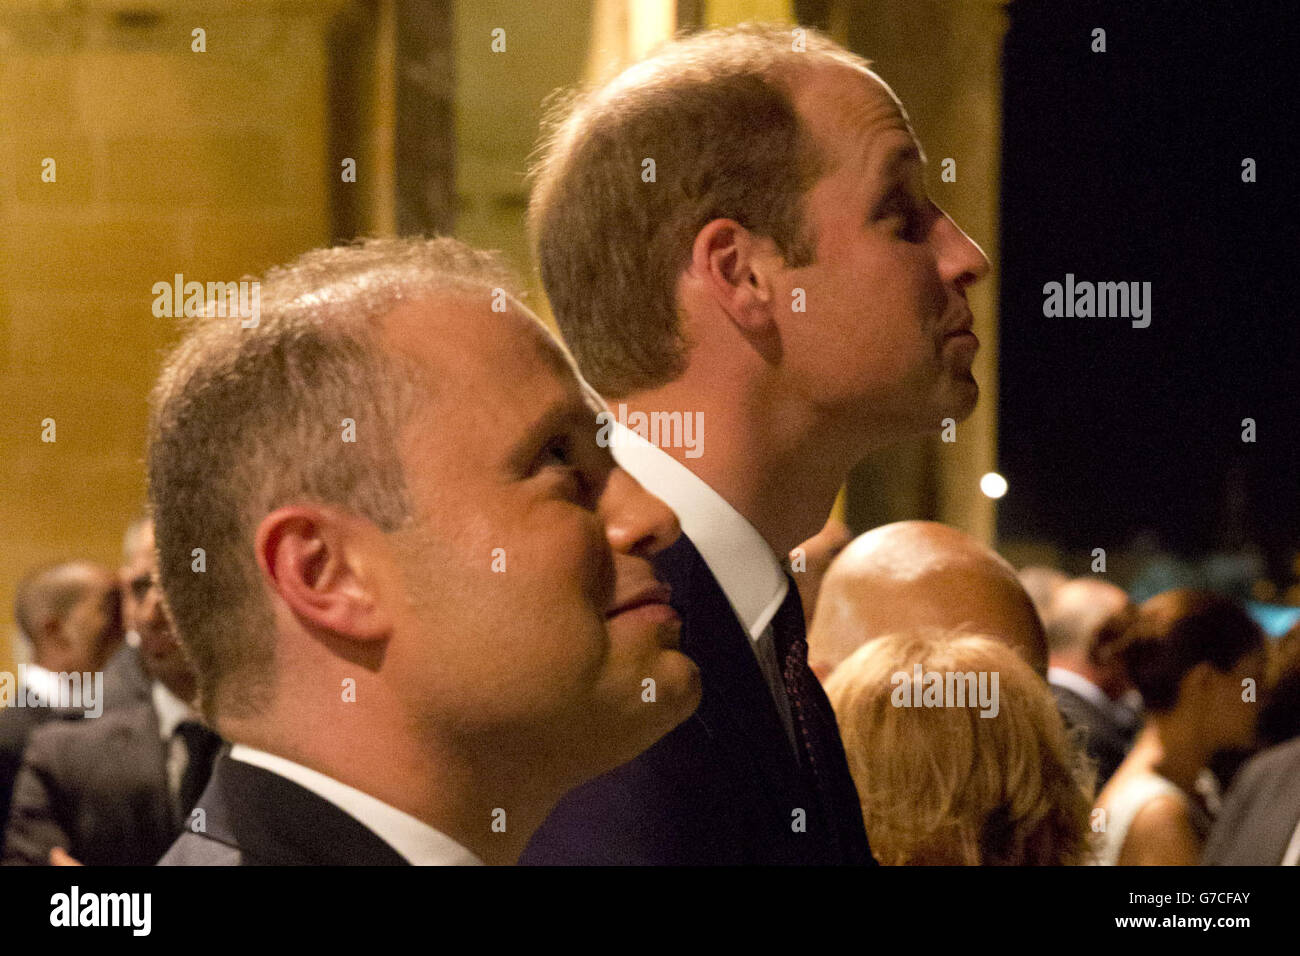 Maltese Prime Minister Joseph Muscat (left) watches fireworks with the Duke of Cambridge at the Upper Barrakka Gardens, in Valletta, Malta, during an evening celebration marking the 50th anniversary of Malta's independence. Stock Photo